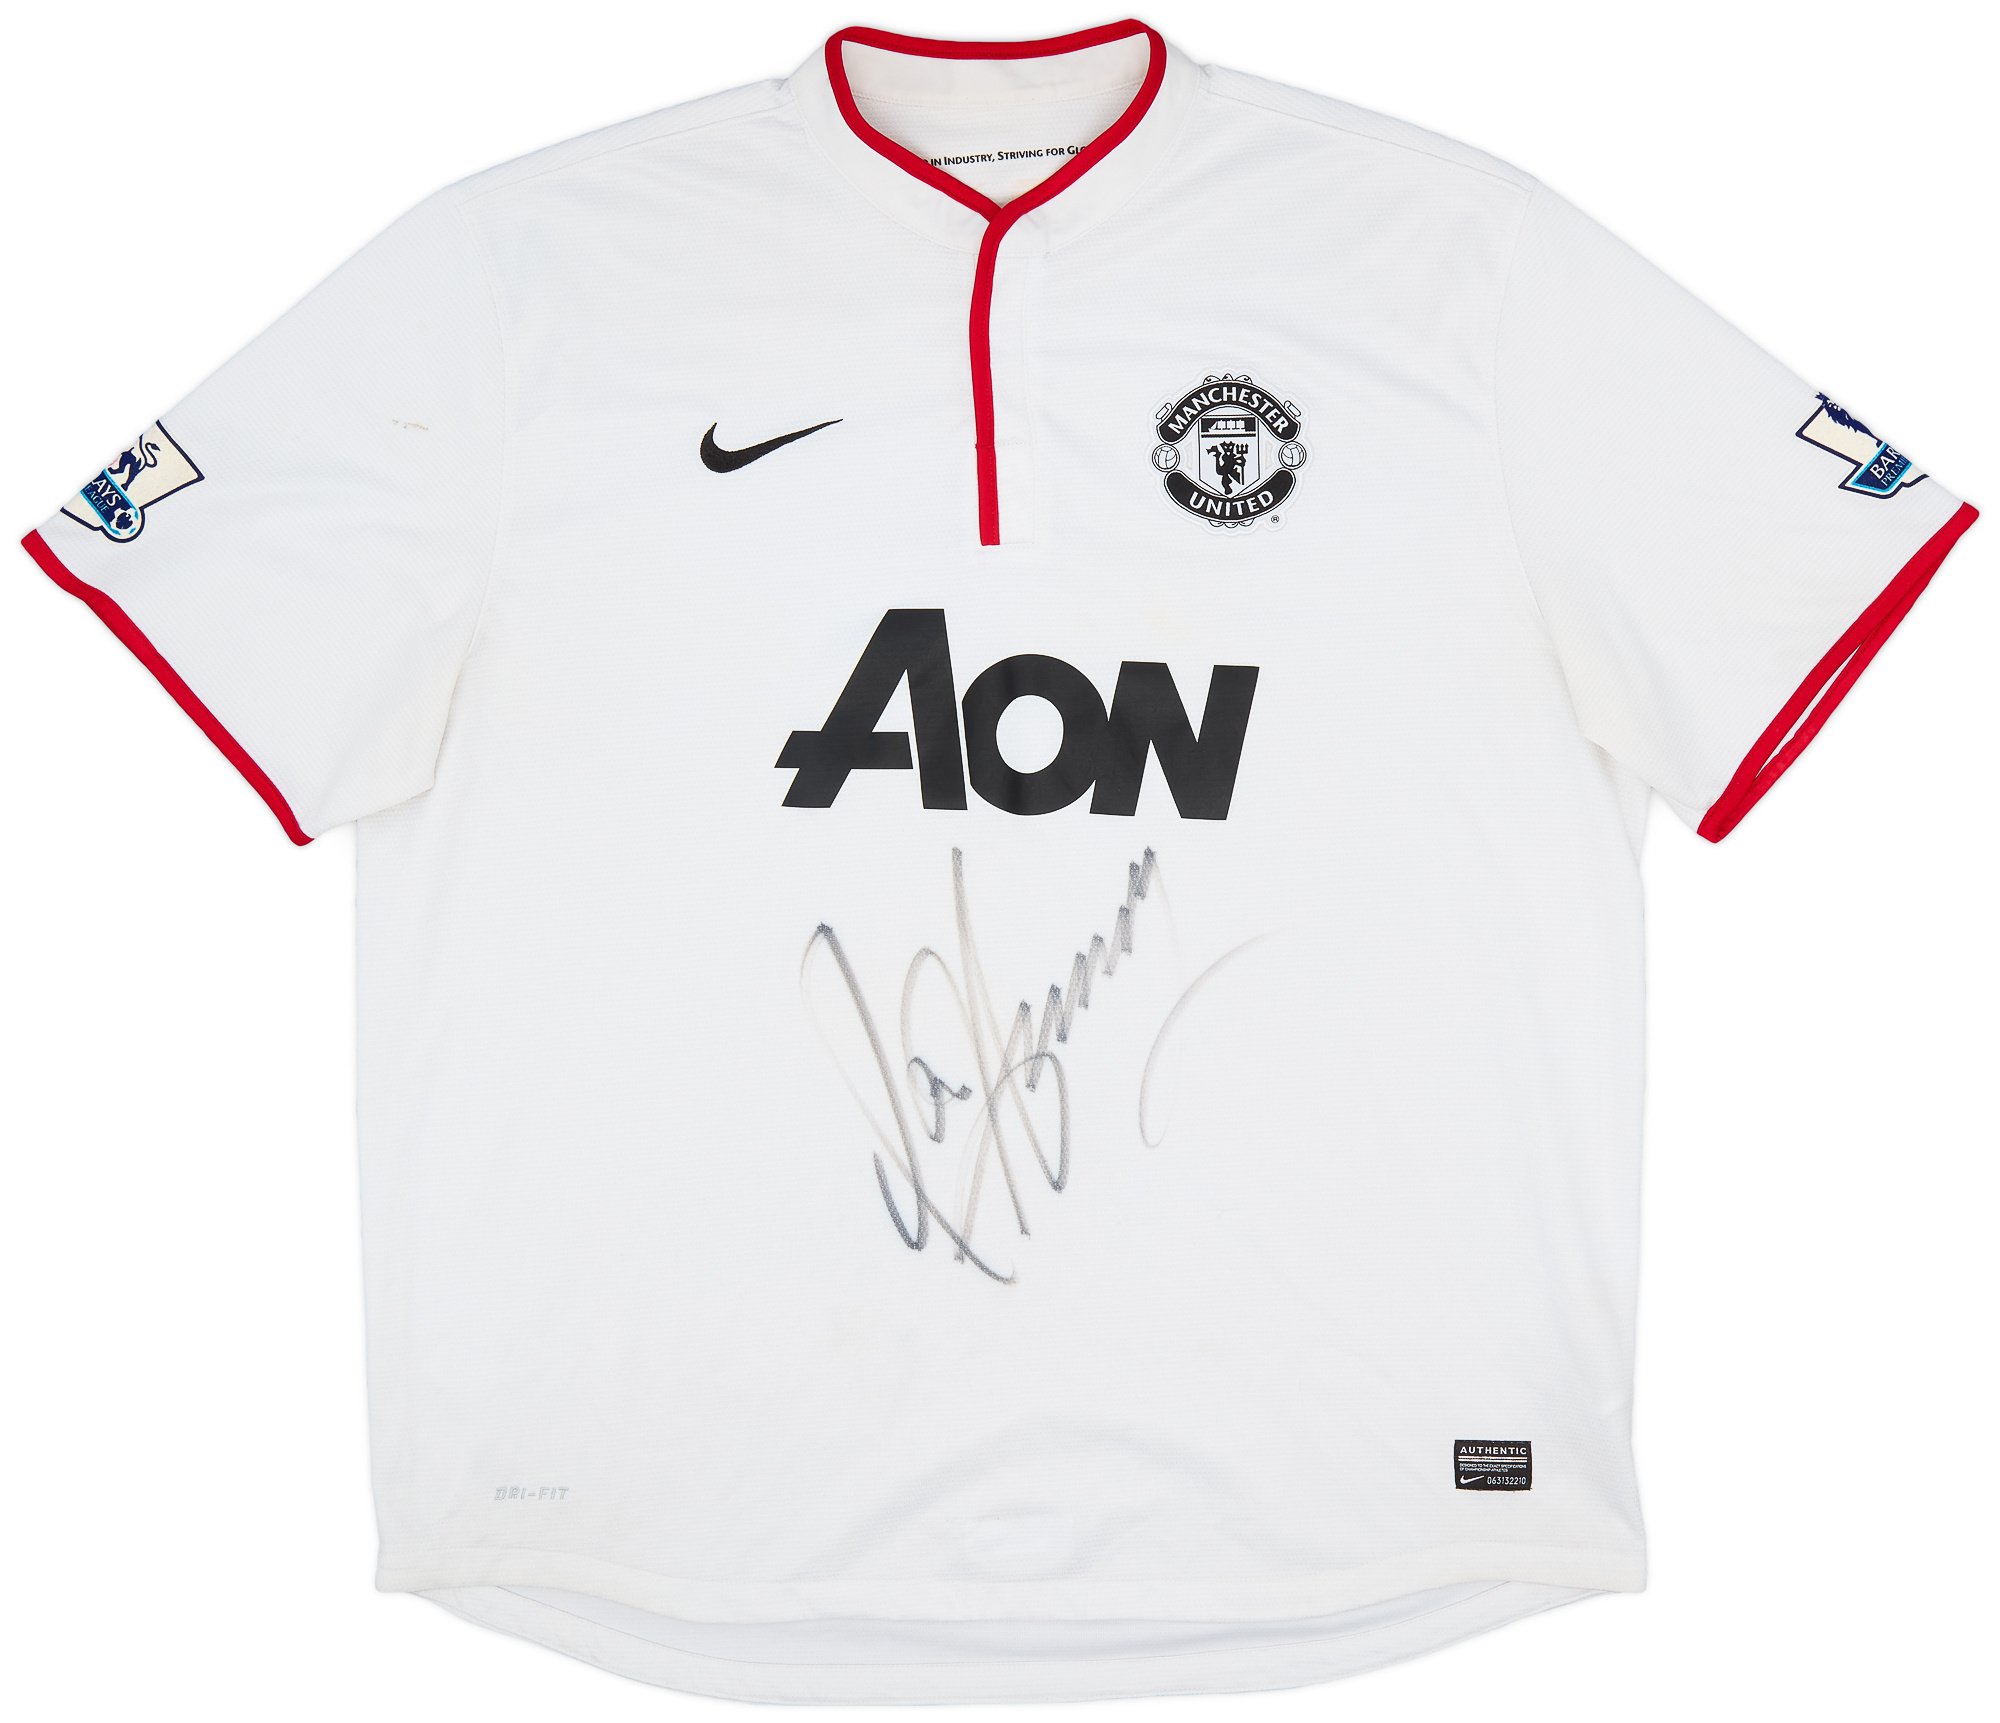 2012-14 Manchester United Signed Away Shirt - 7/10 - ()